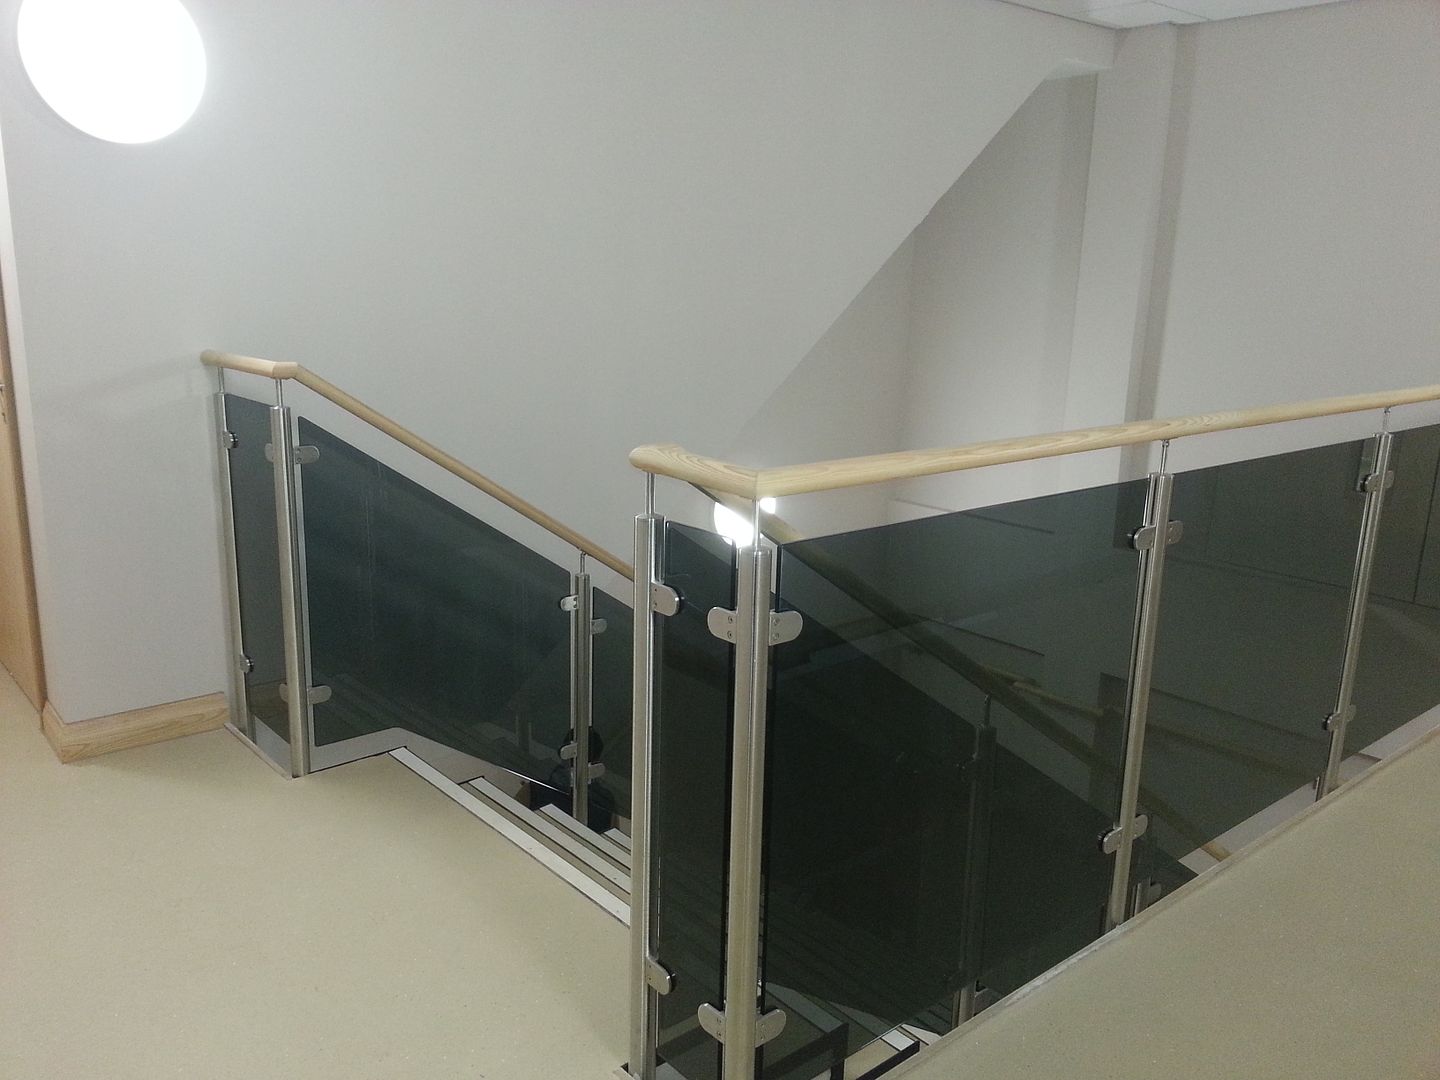 Glazed stainless steel balcony balustrade with coloured glass infills and ash timber handrail